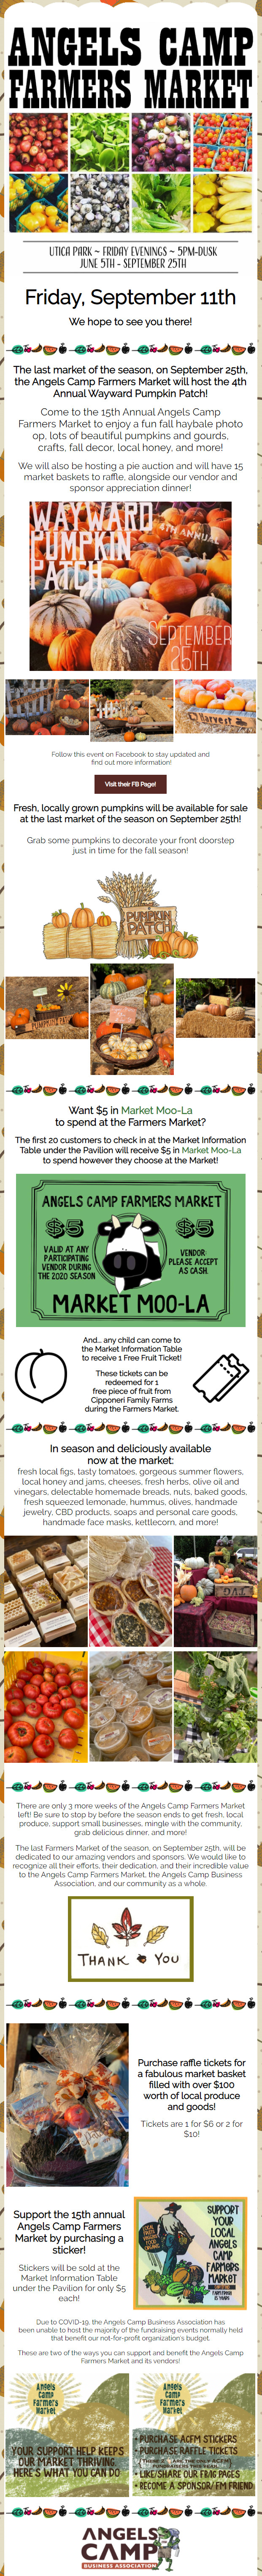 The Angels Camp Farmers Market for Tonight!